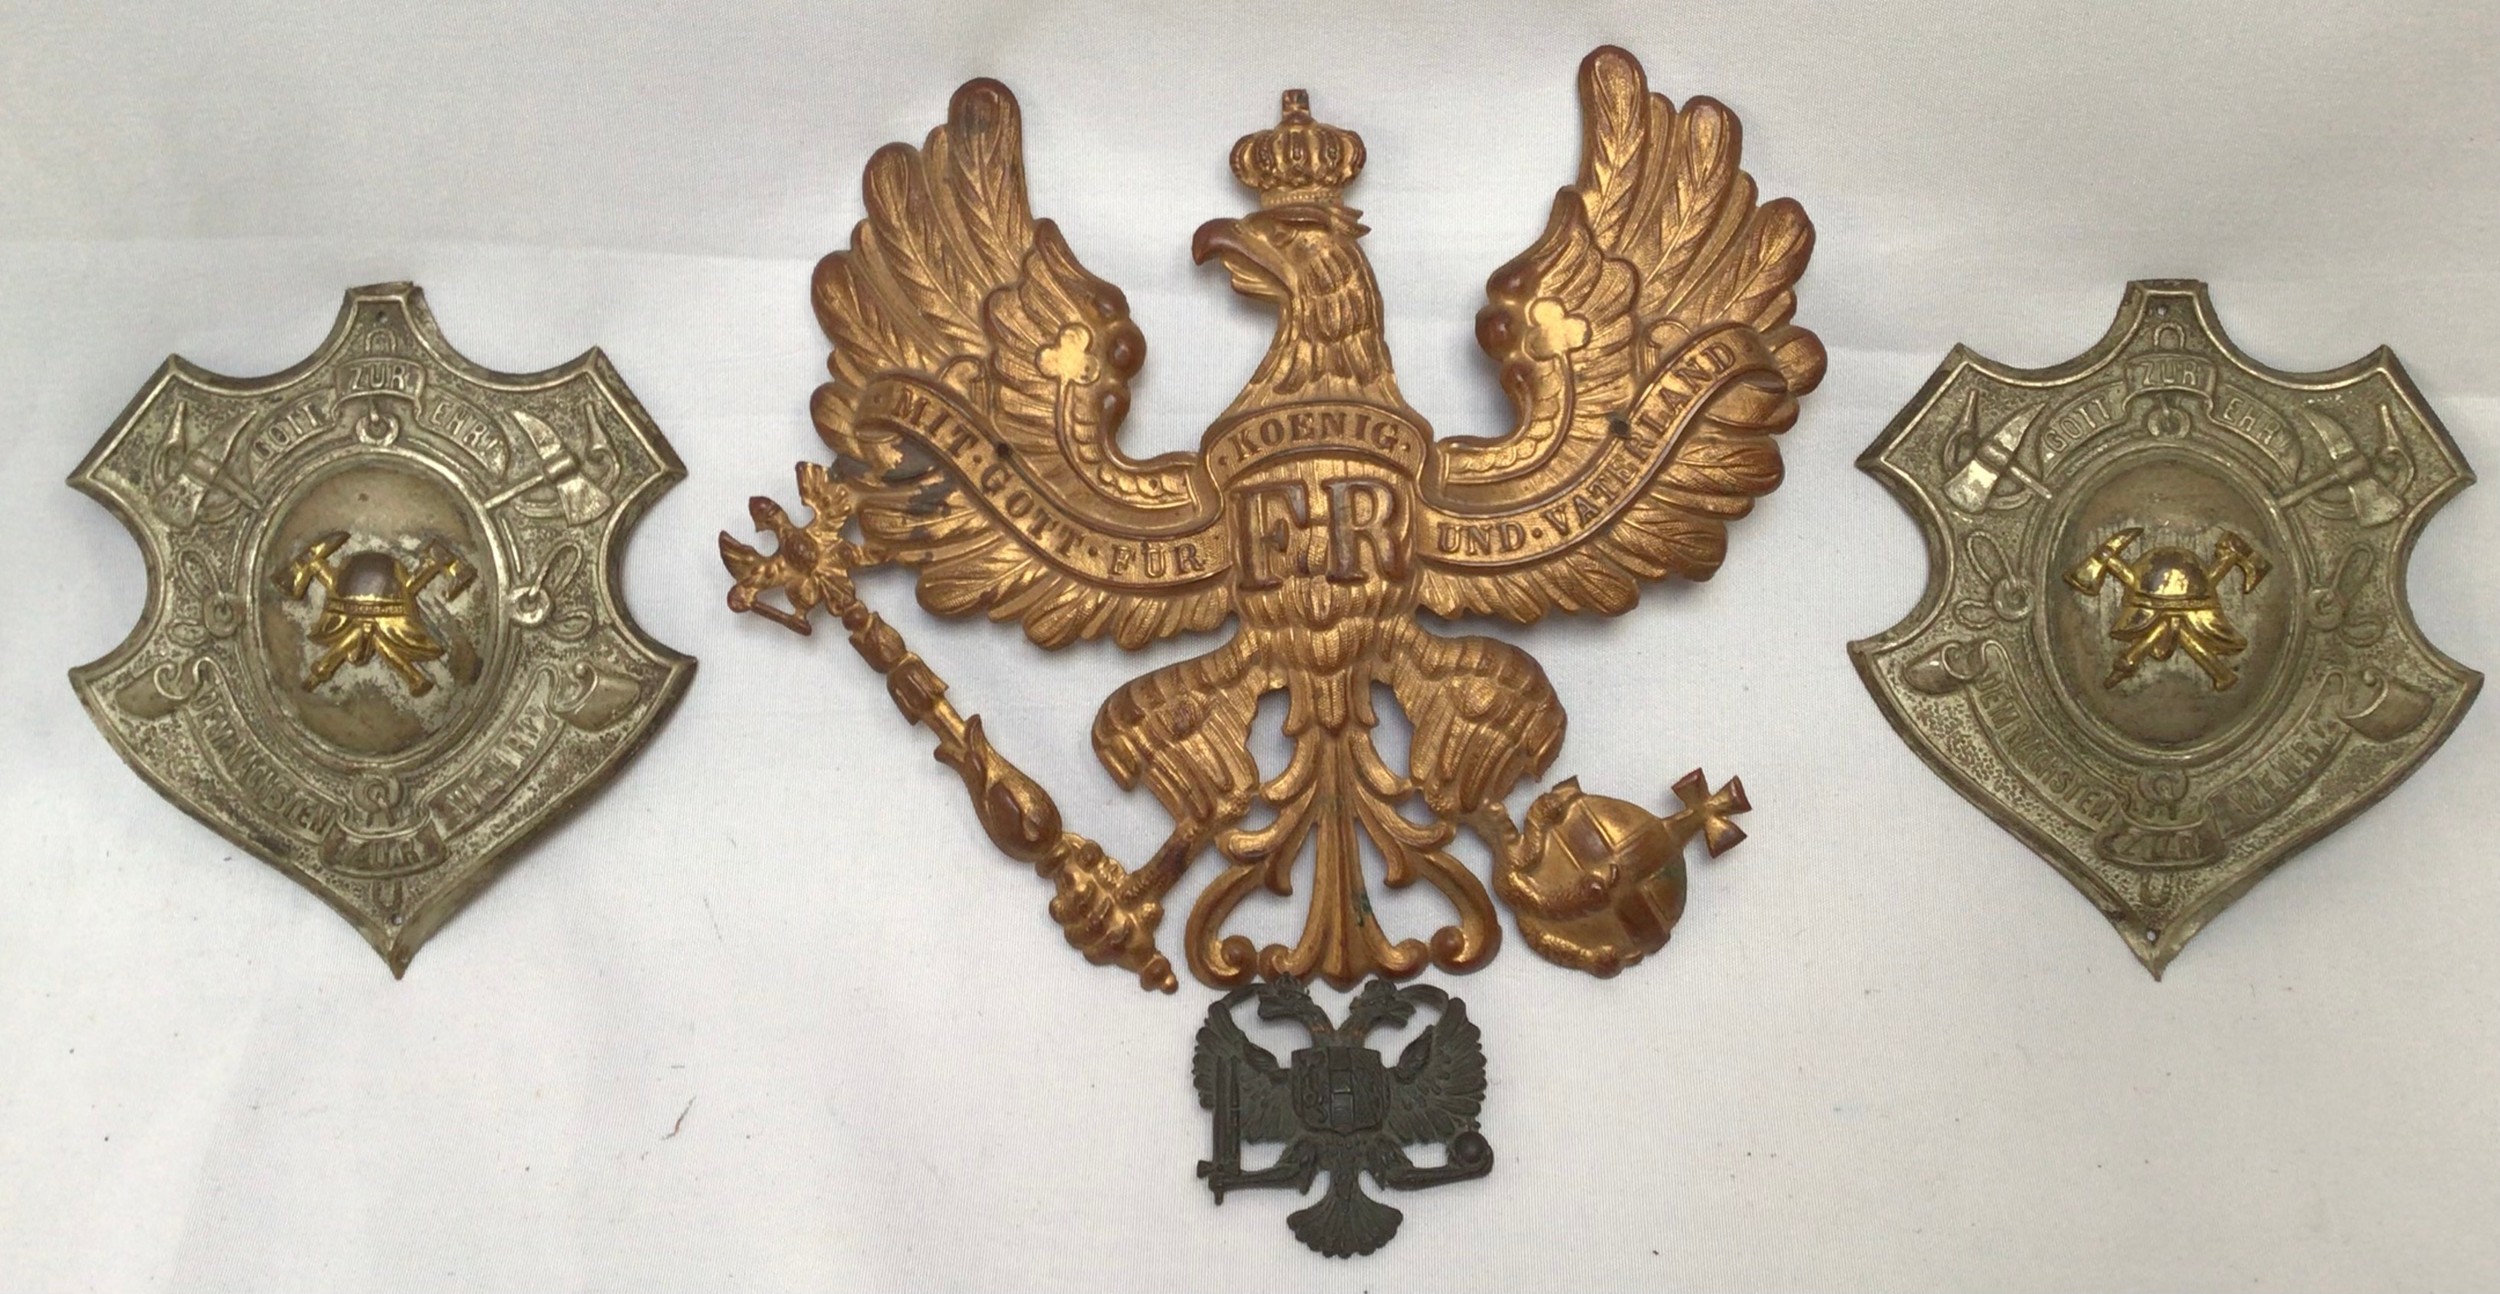 A Prussian Imperial German Infantry Officer’s Pickelhaube helmet brass plate, together with a pair